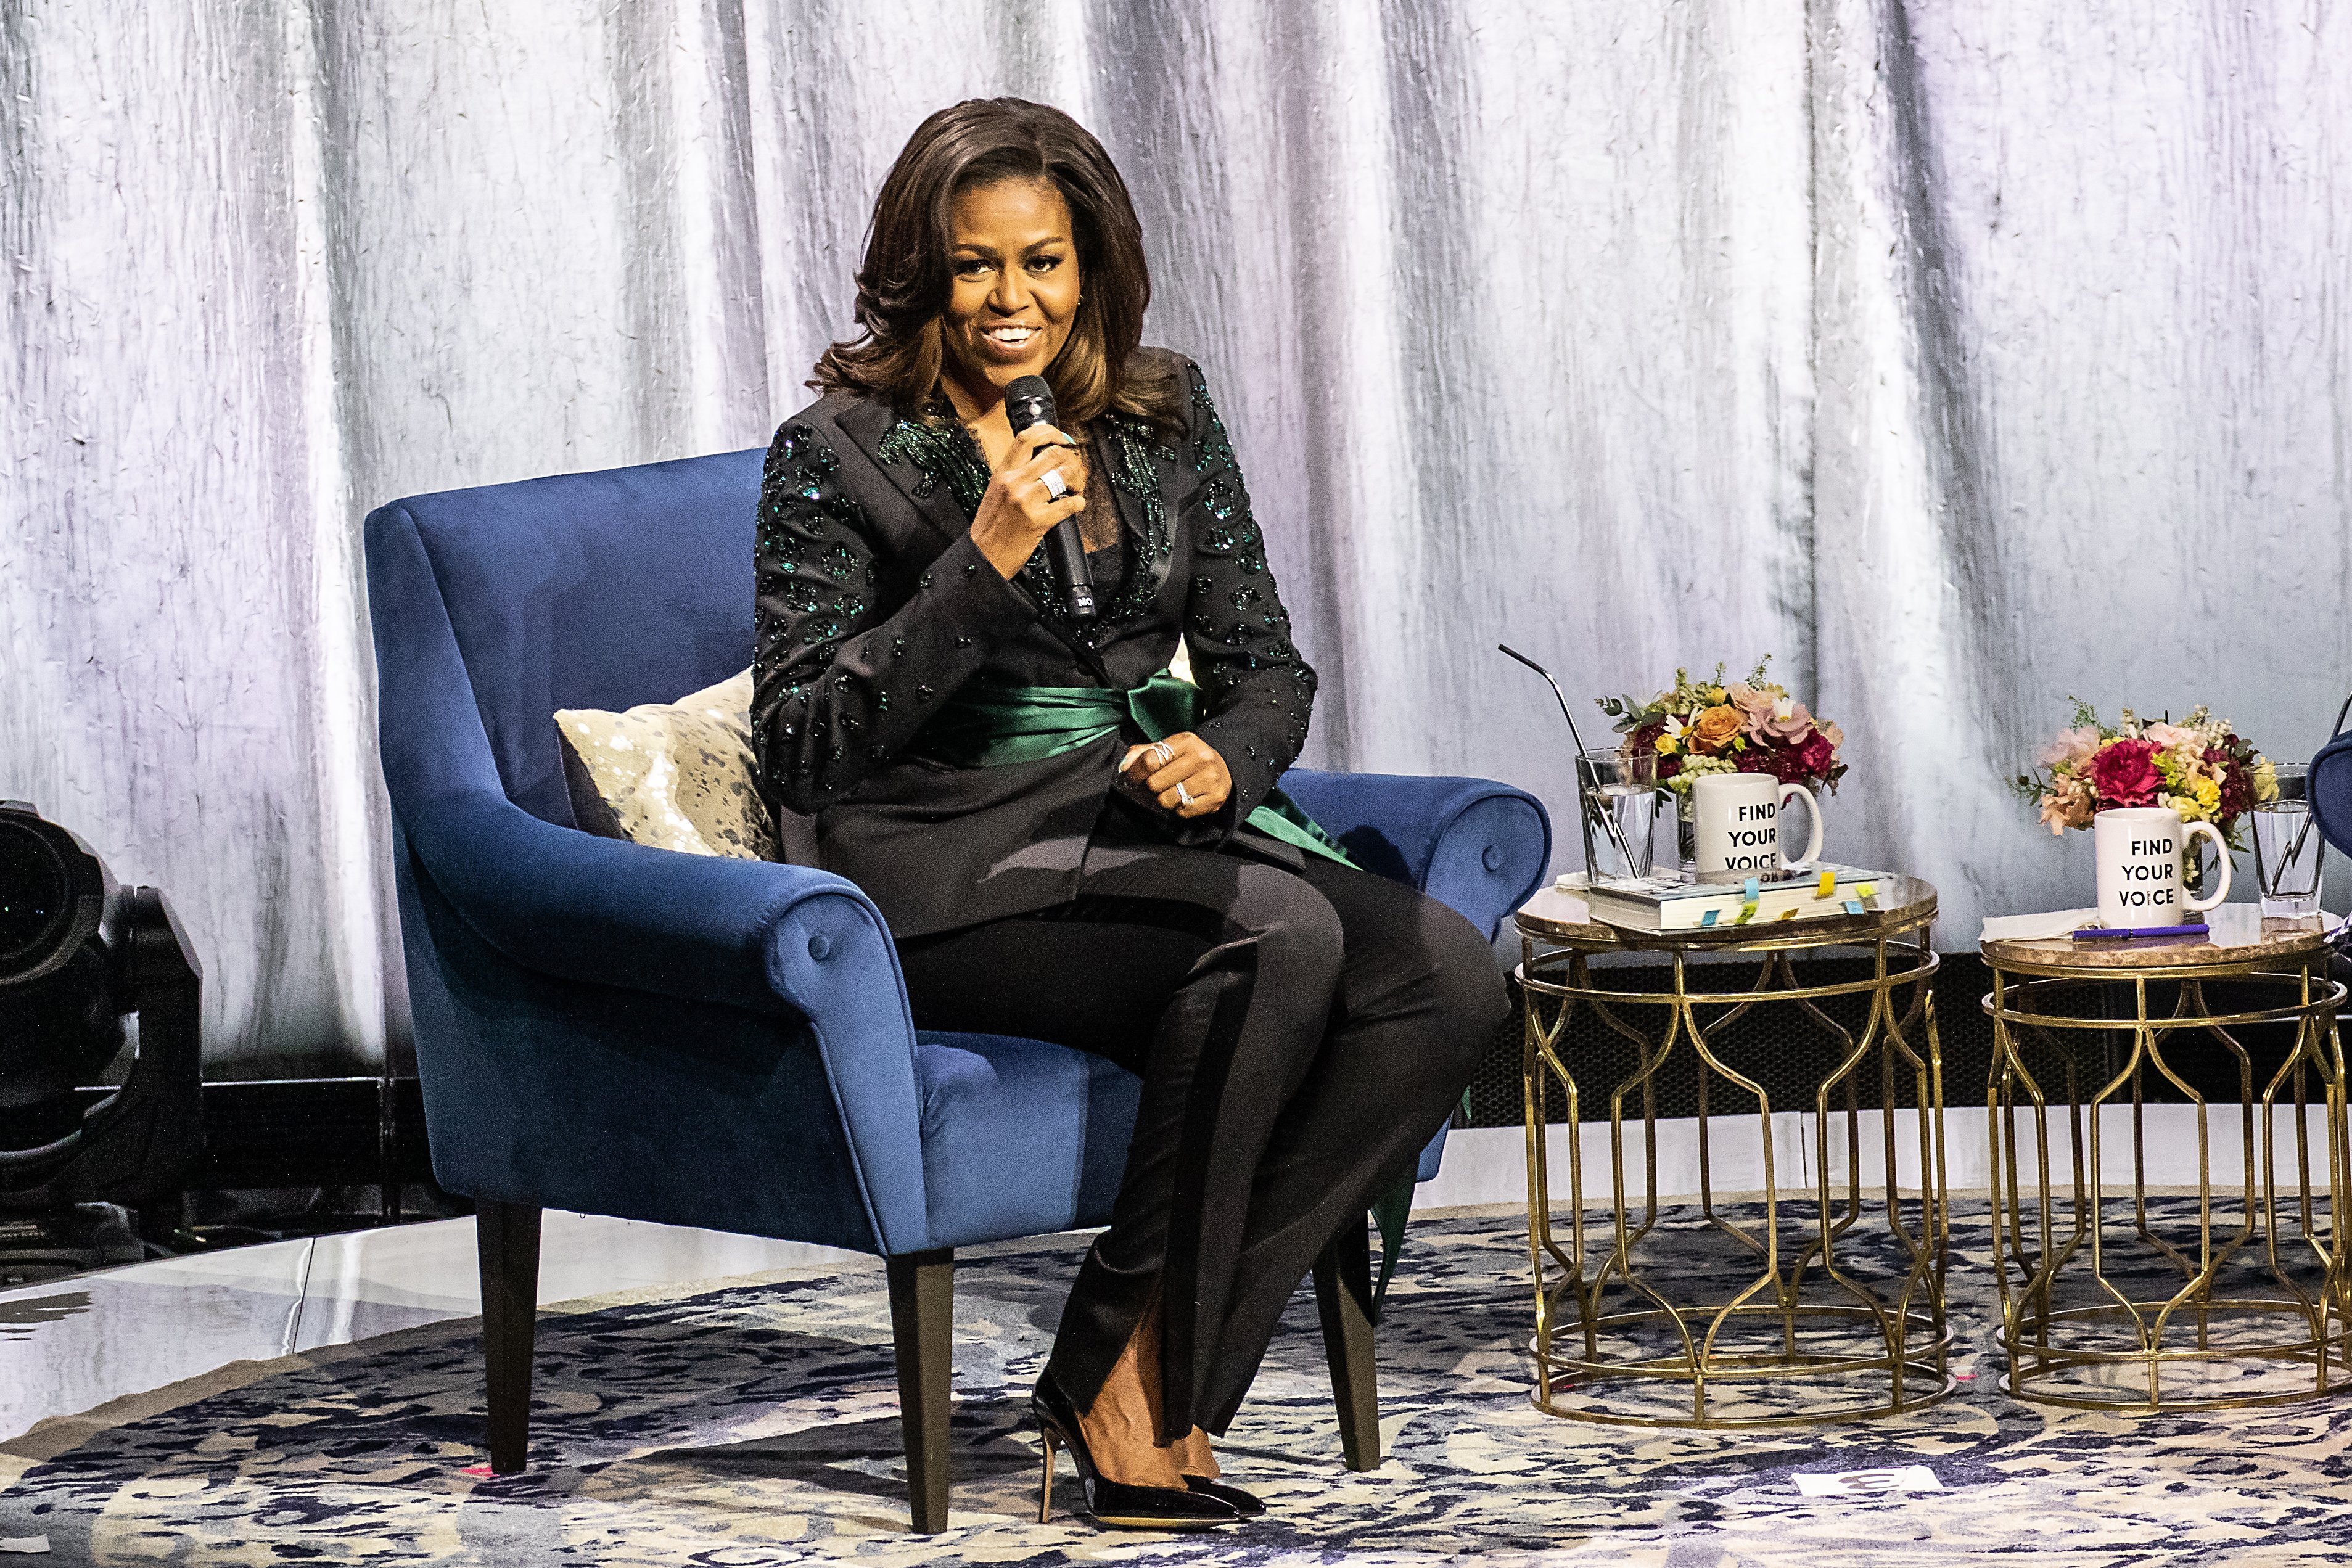 Michelle Obama speaking during the Oslo, Norway leg of her "Becoming" book tour in April 2019. | Photo: Getty Images